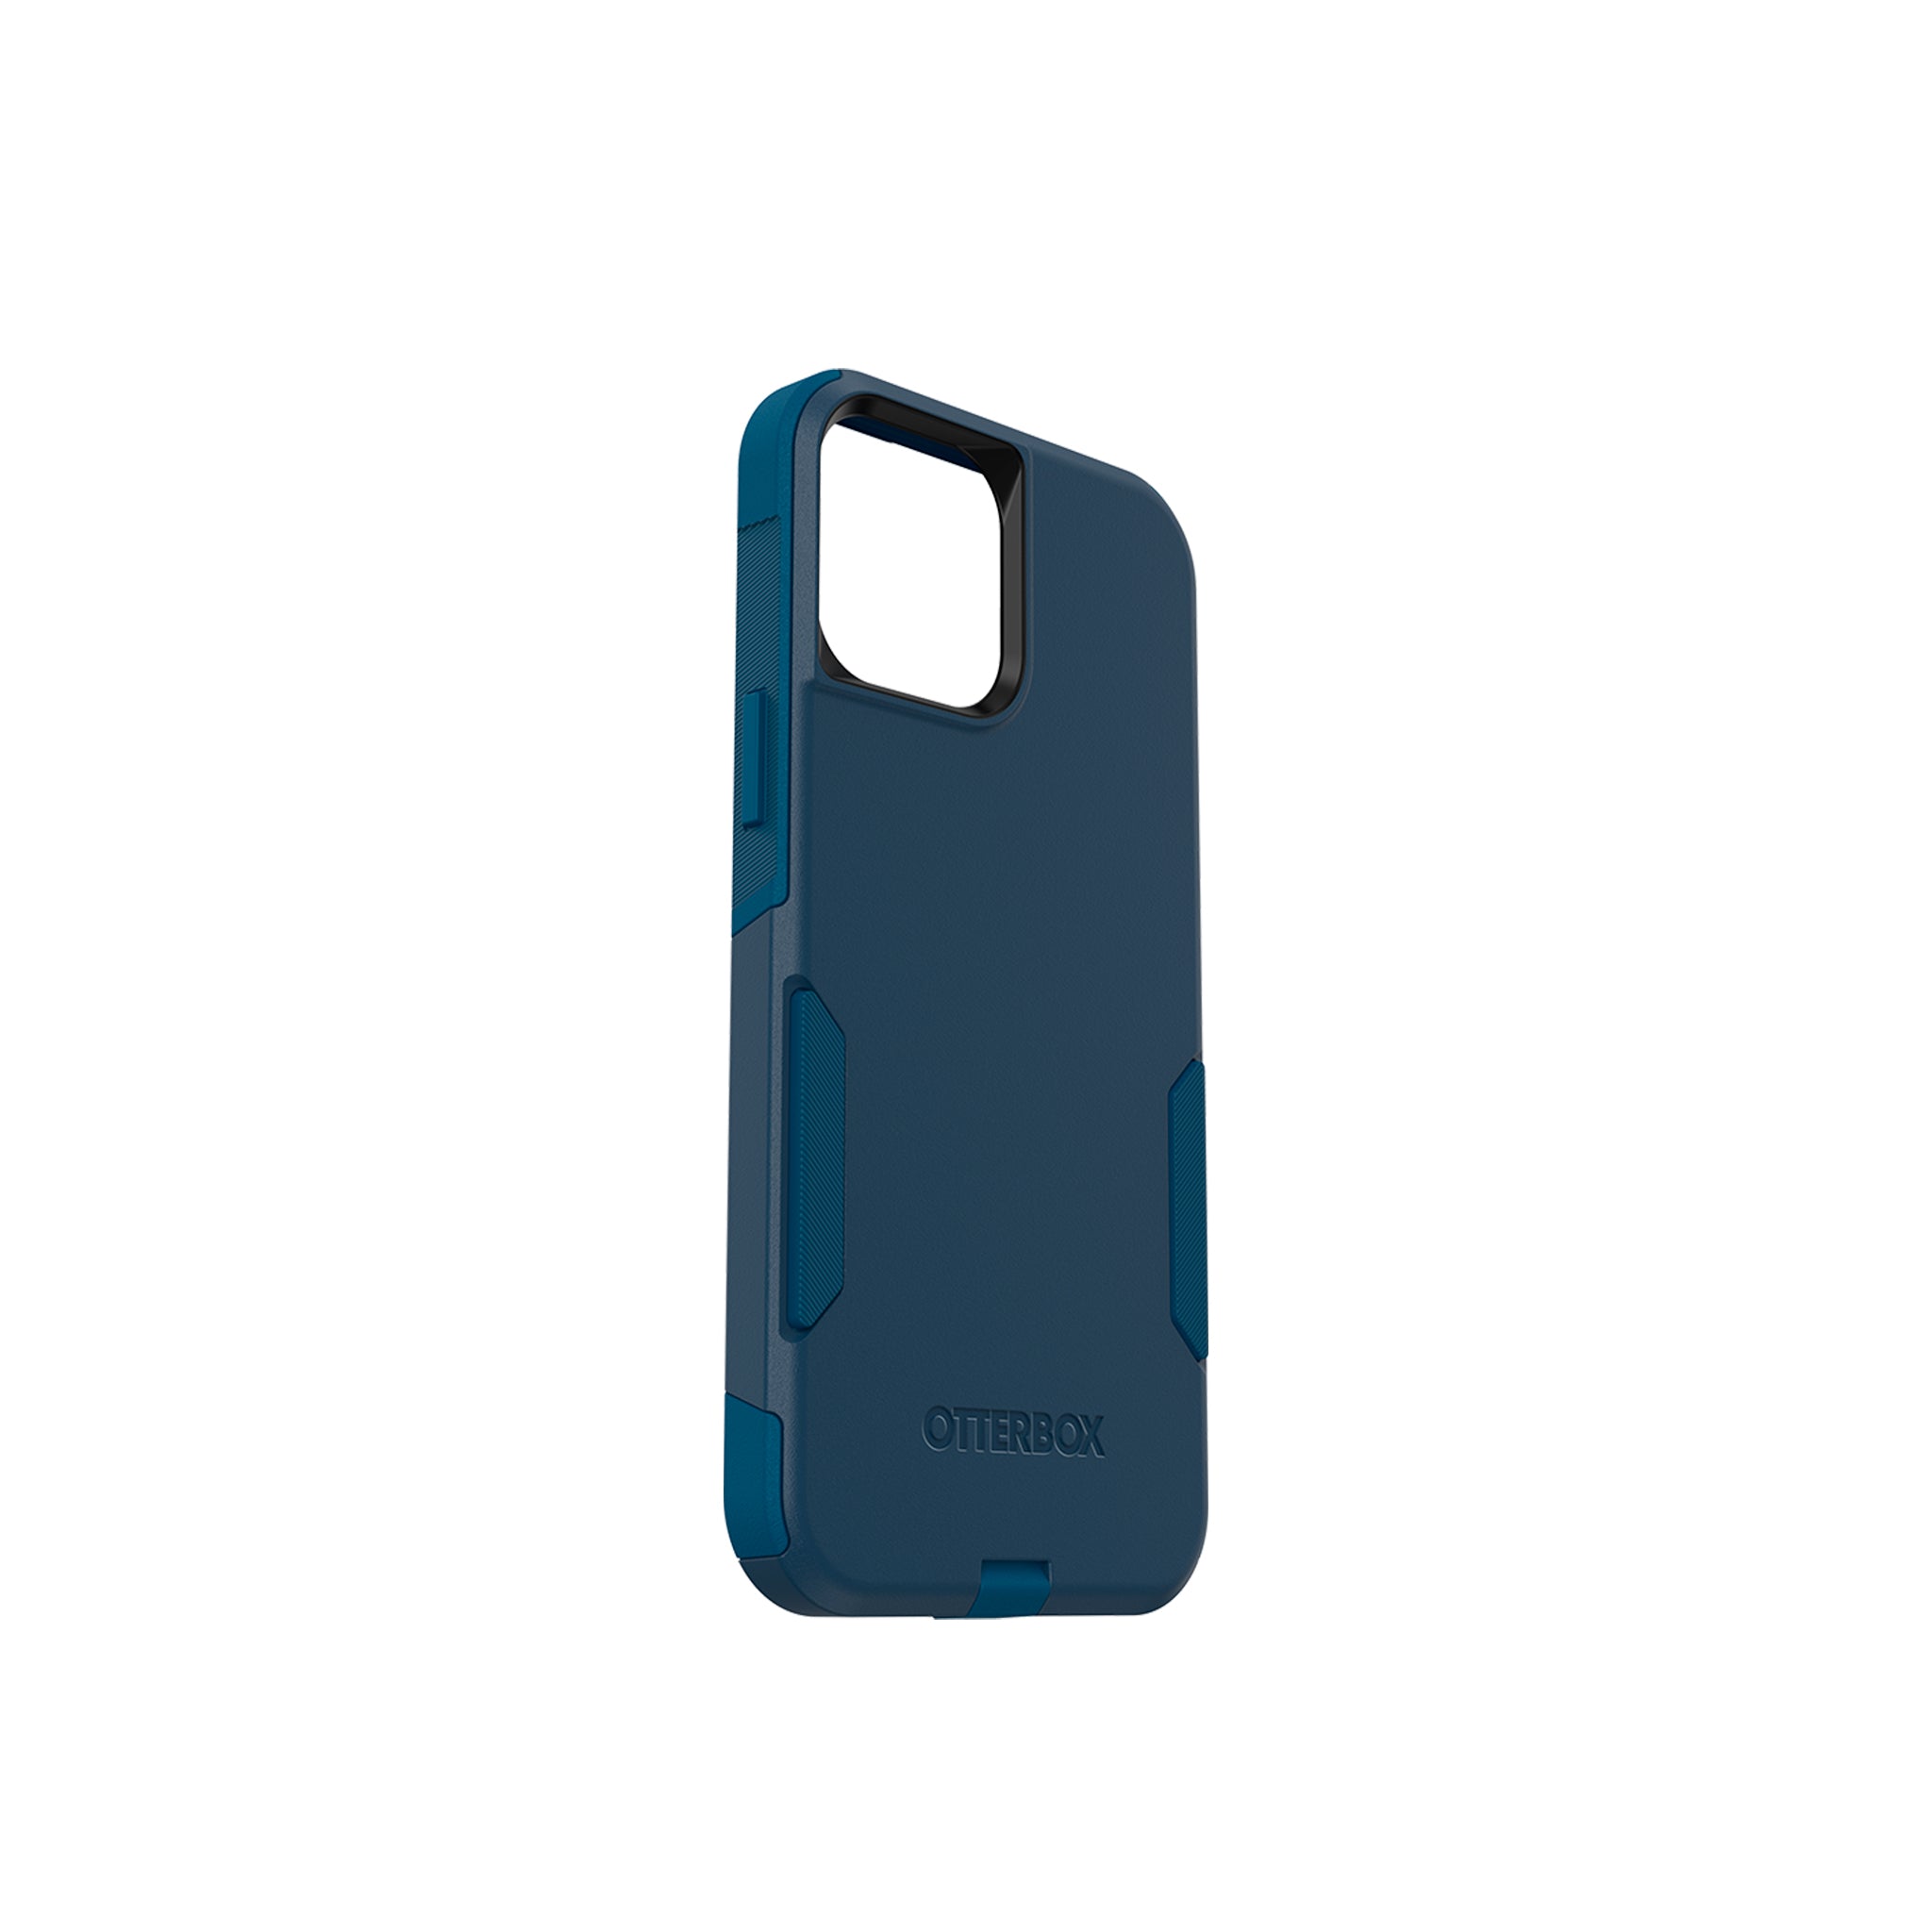 OtterBox - Commuter for iPhone 12 Pro Max - Bespoke Way